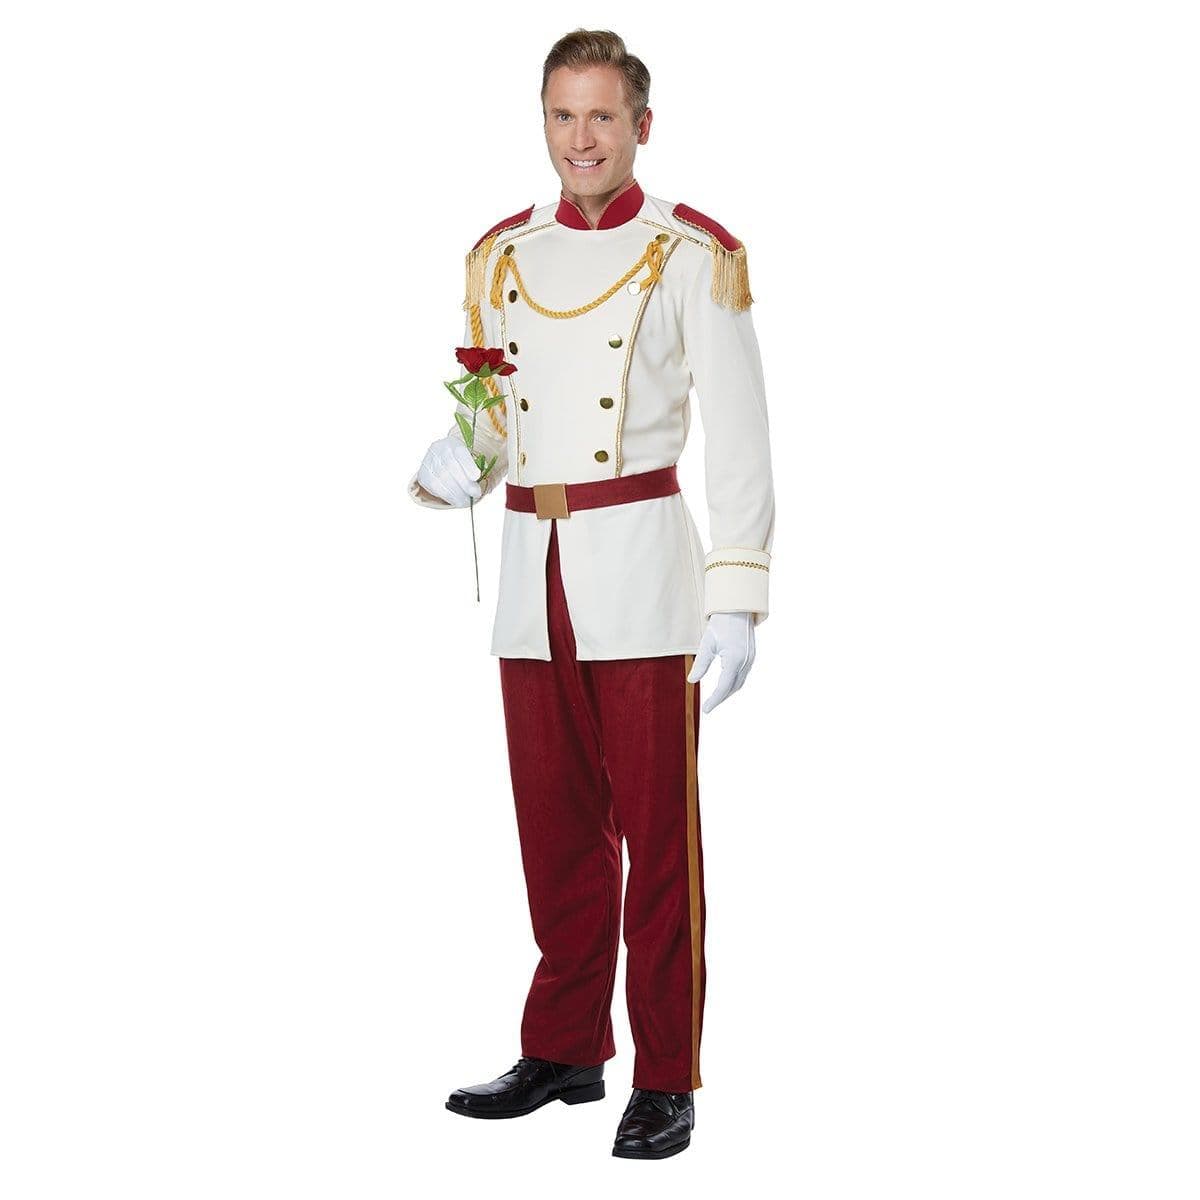 Buy Costumes Royal Storybook Prince costume for Adults sold at Party Expert